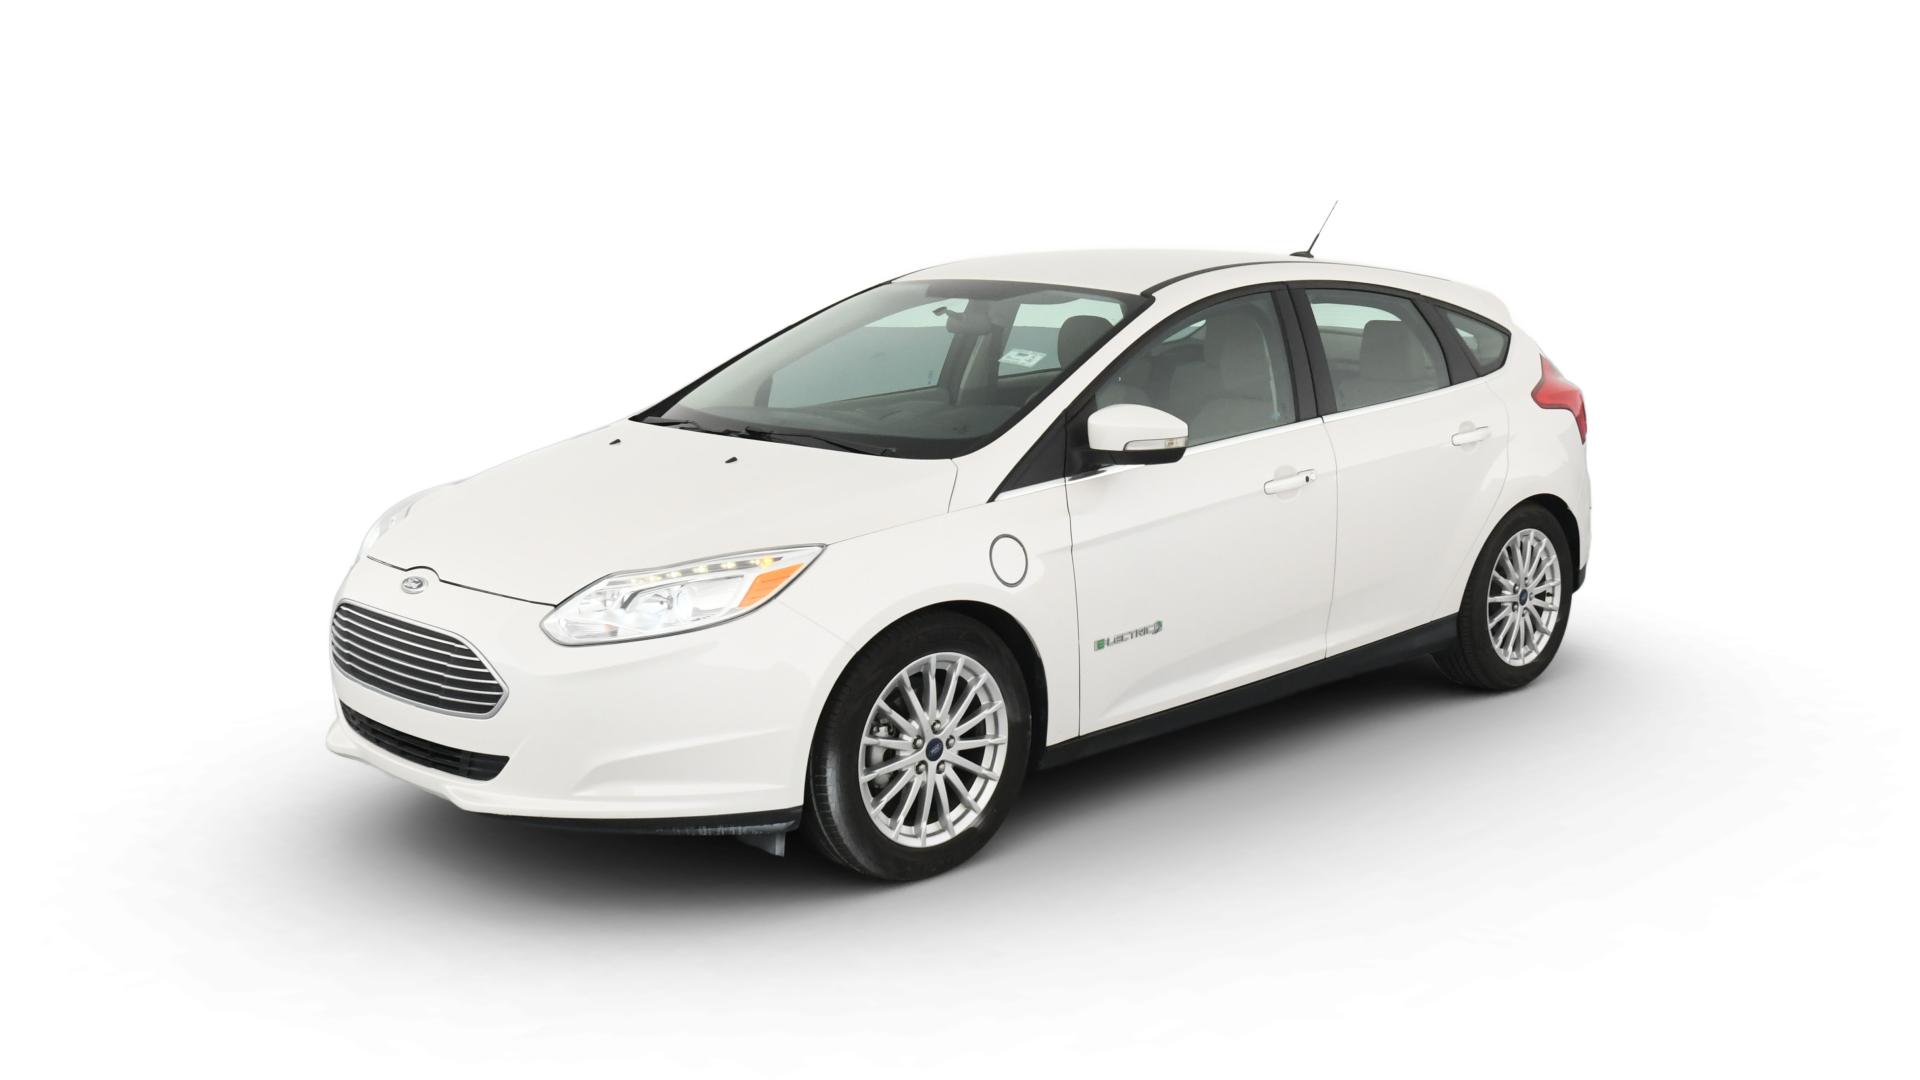 Used Ford Focus Electric For Sale Online | Carvana